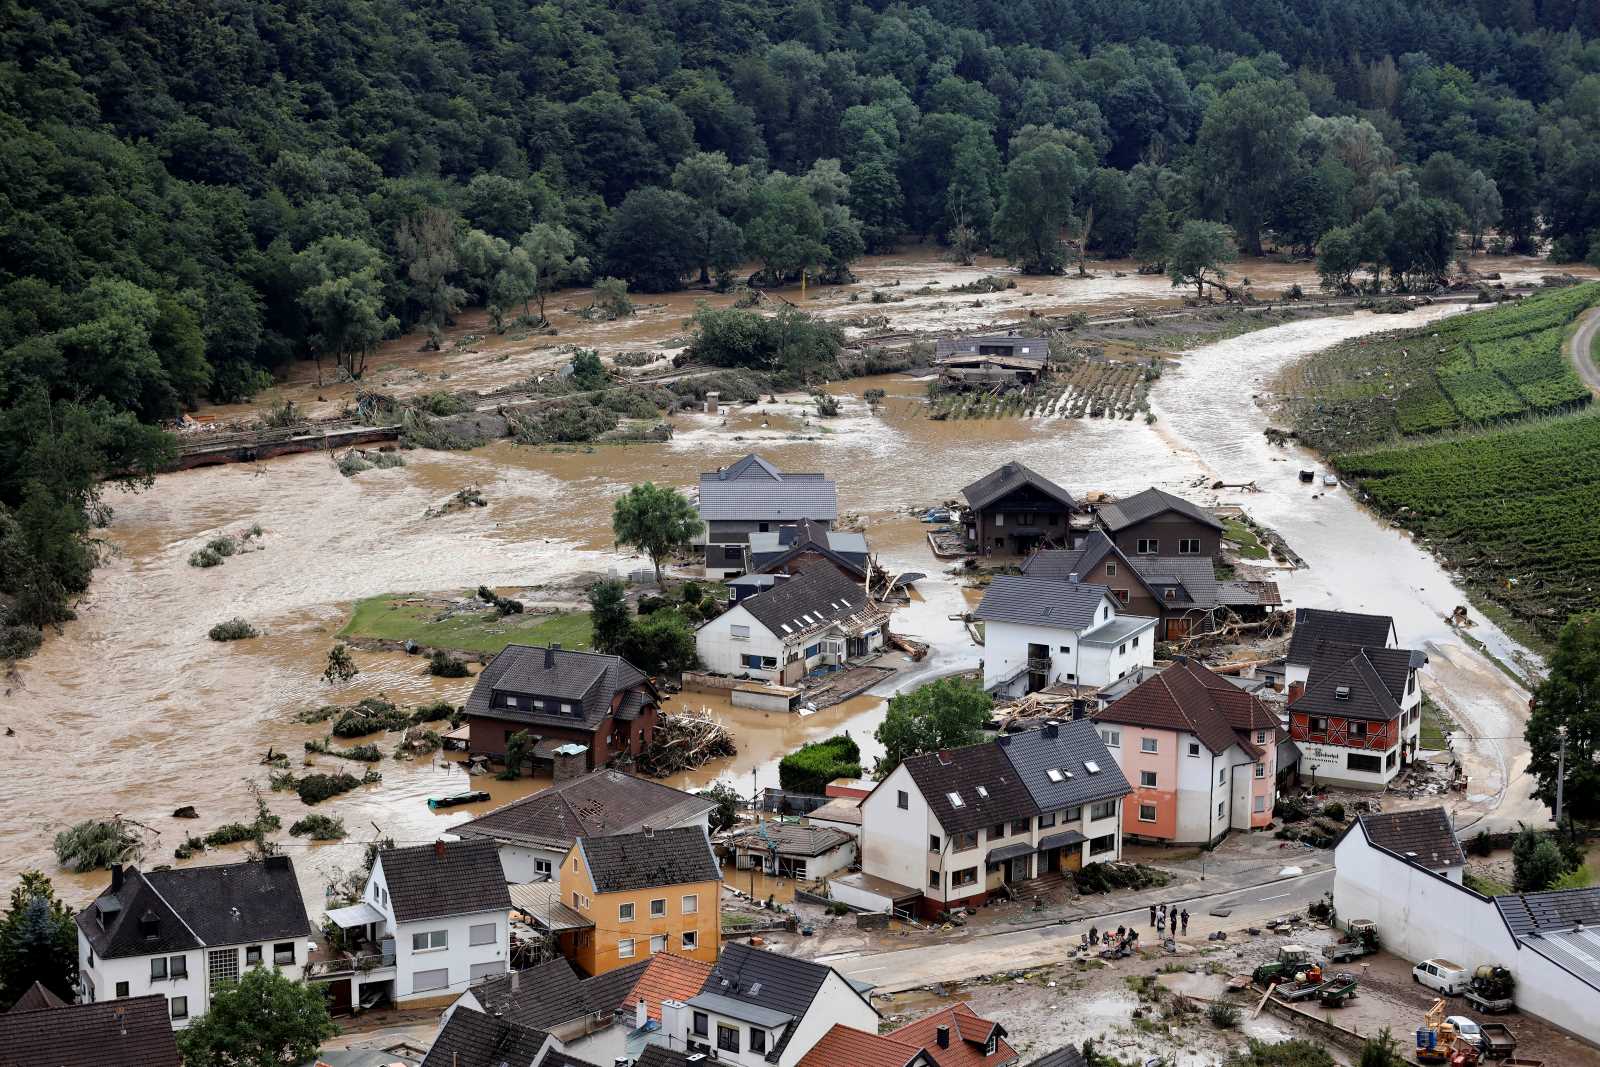 In the summer of 2021, the German river Ahr burst its banks in many places and swept away entire villages. More than 130 people died.